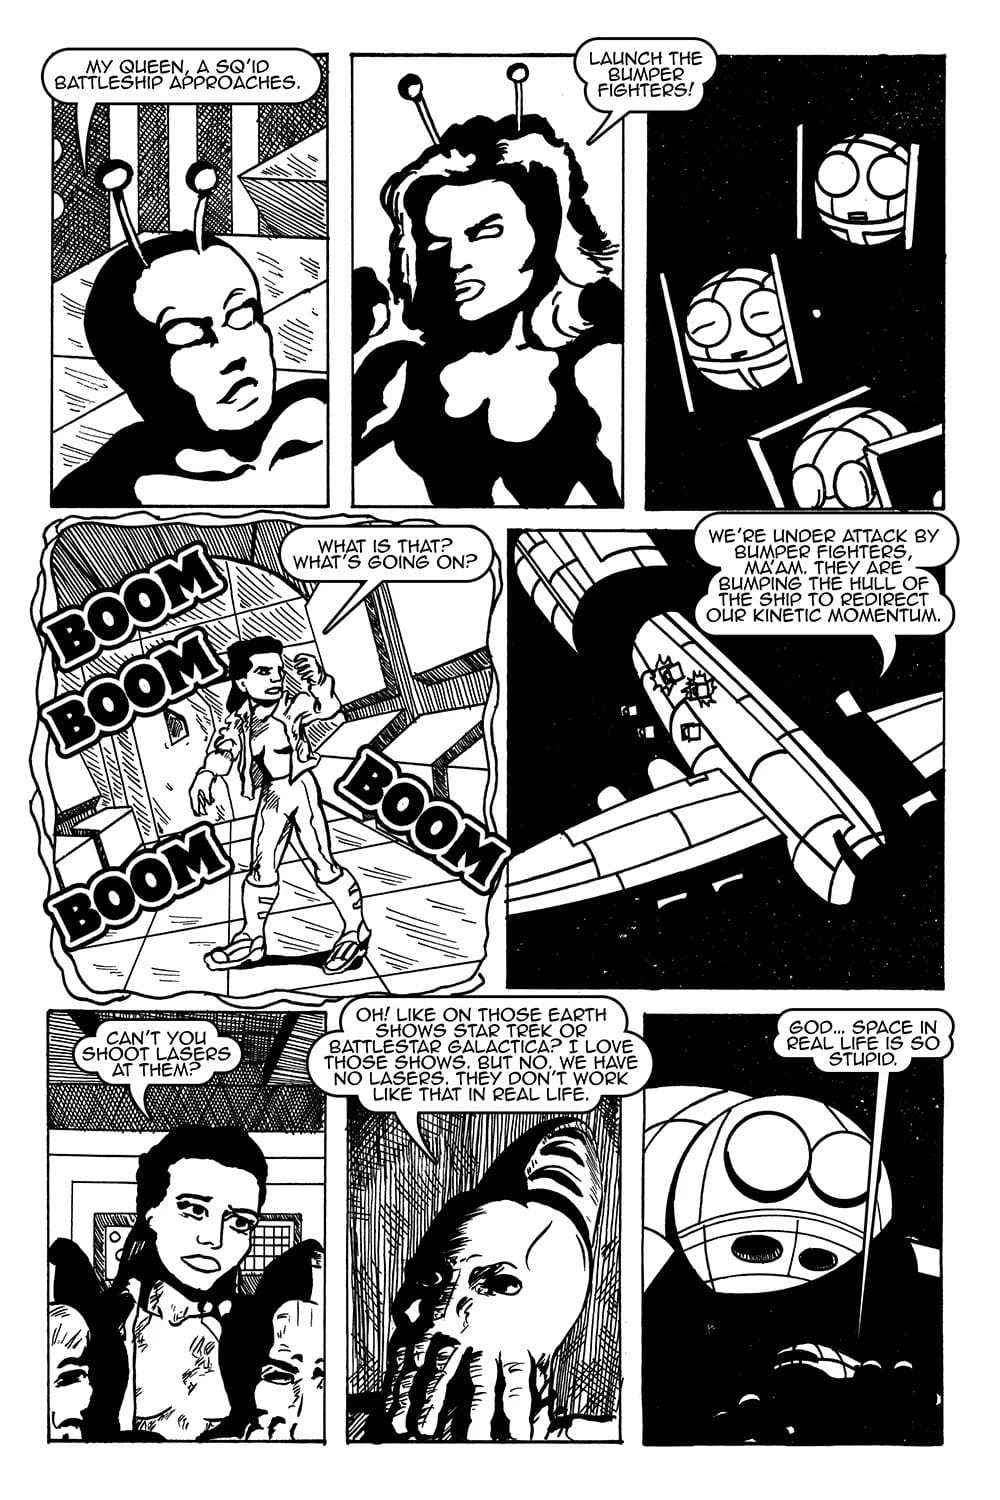 Issue 01 page 14